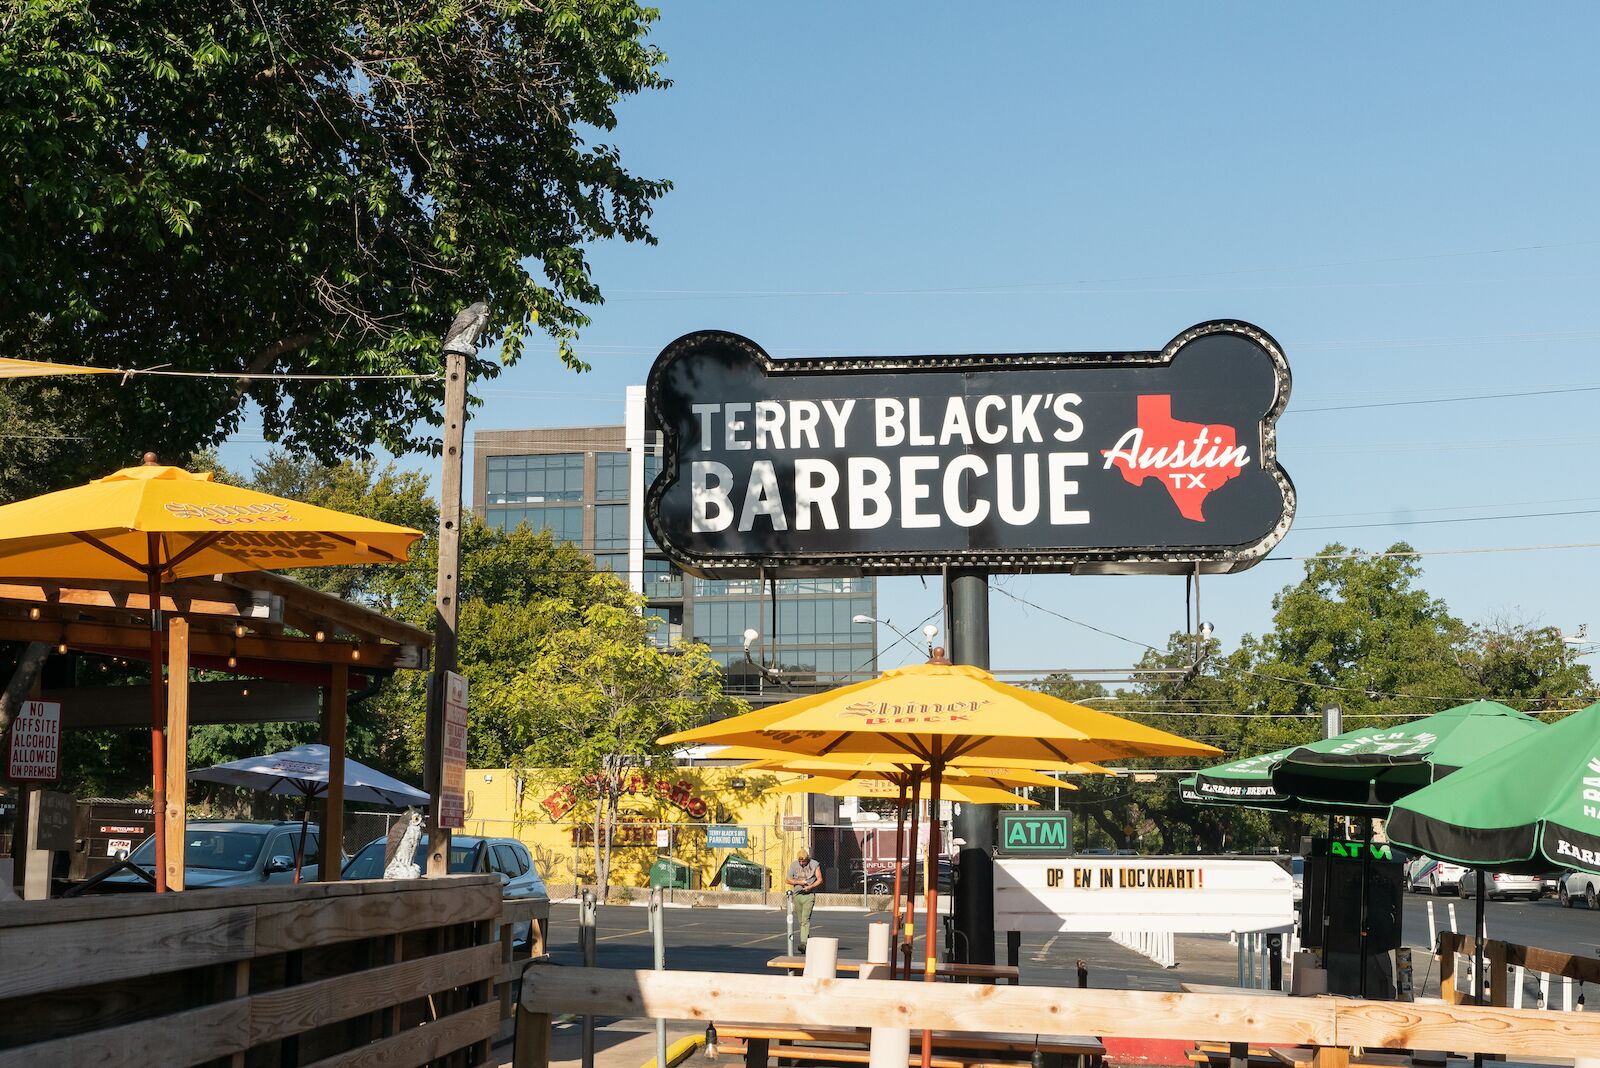 The exterior of Terry Black's Barbcue restaurant with black sign and yellow umbrellos